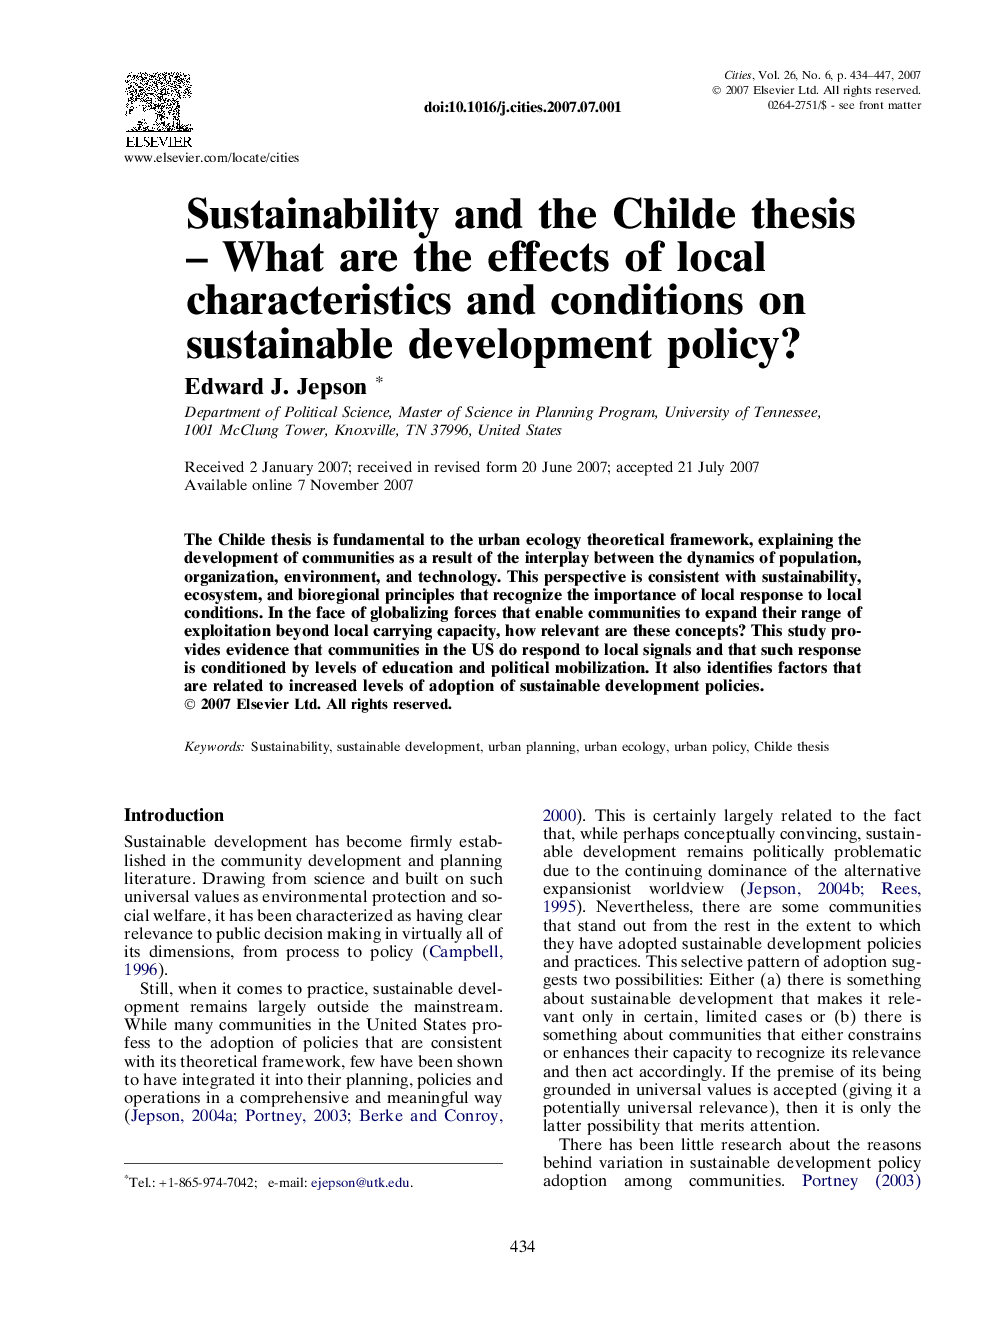 Sustainability and the Childe thesis - What are the effects of local characteristics and conditions on sustainable development policy?